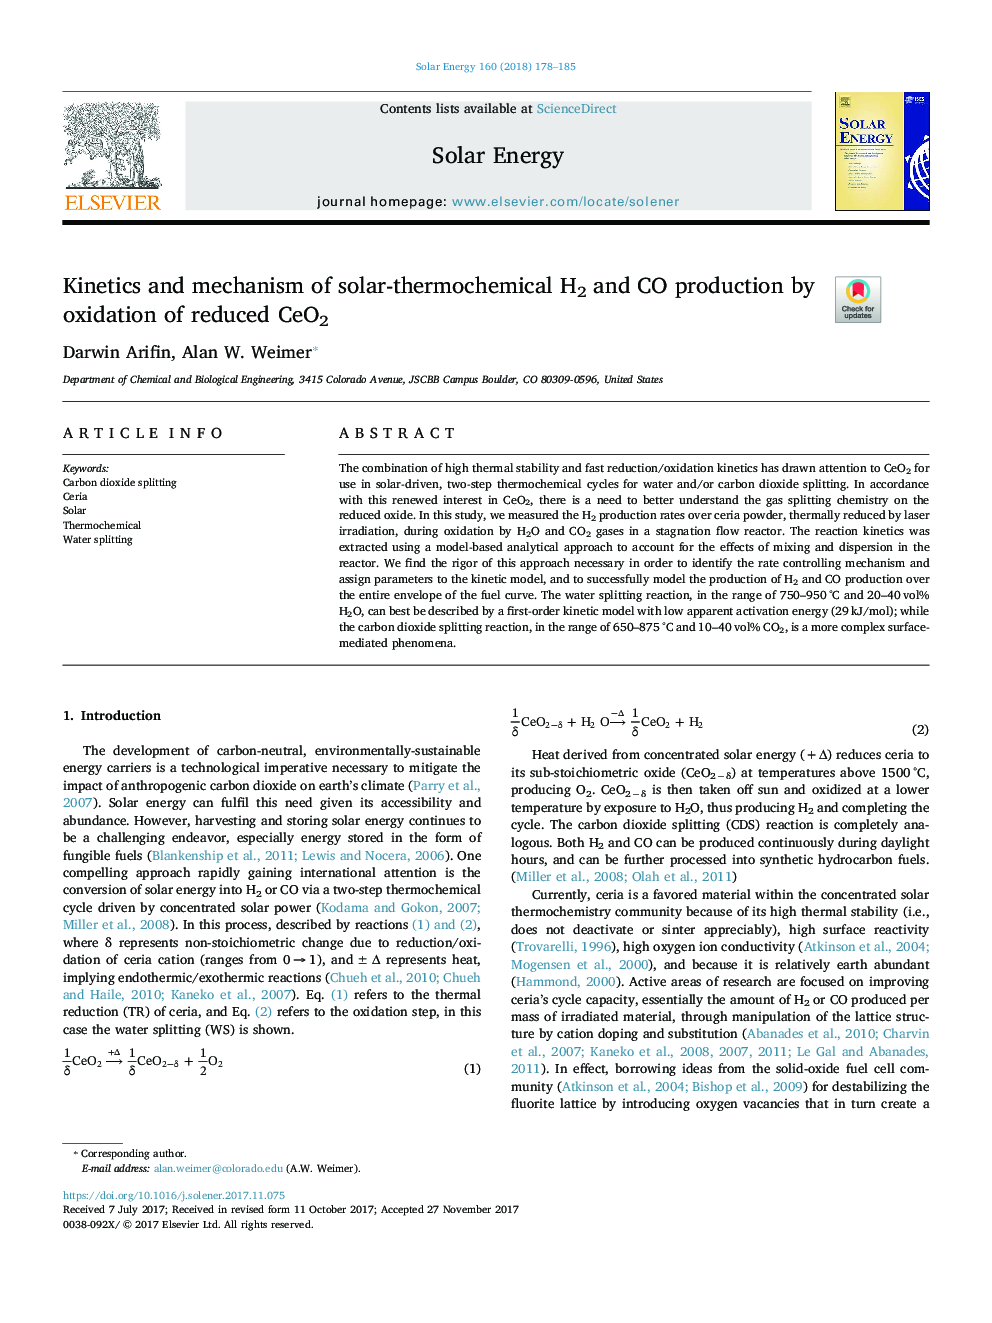 Kinetics and mechanism of solar-thermochemical H2 and CO production by oxidation of reduced CeO2